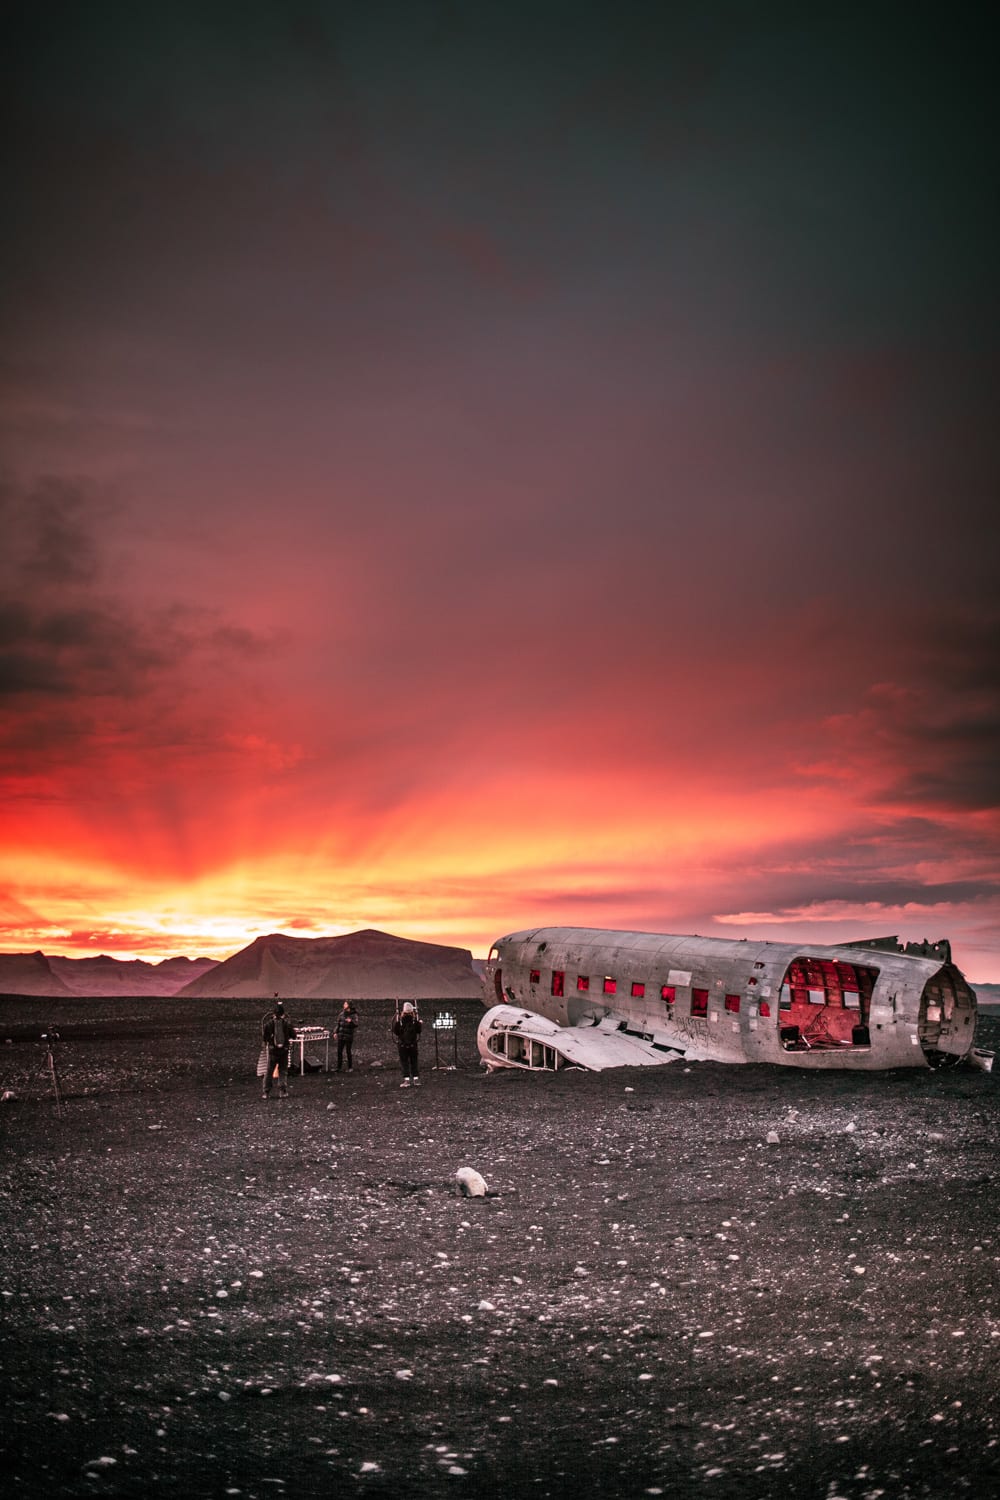 The band Meduza performing at the abandoned aircraft in the South of Iceland during a beautiful red sky sunset